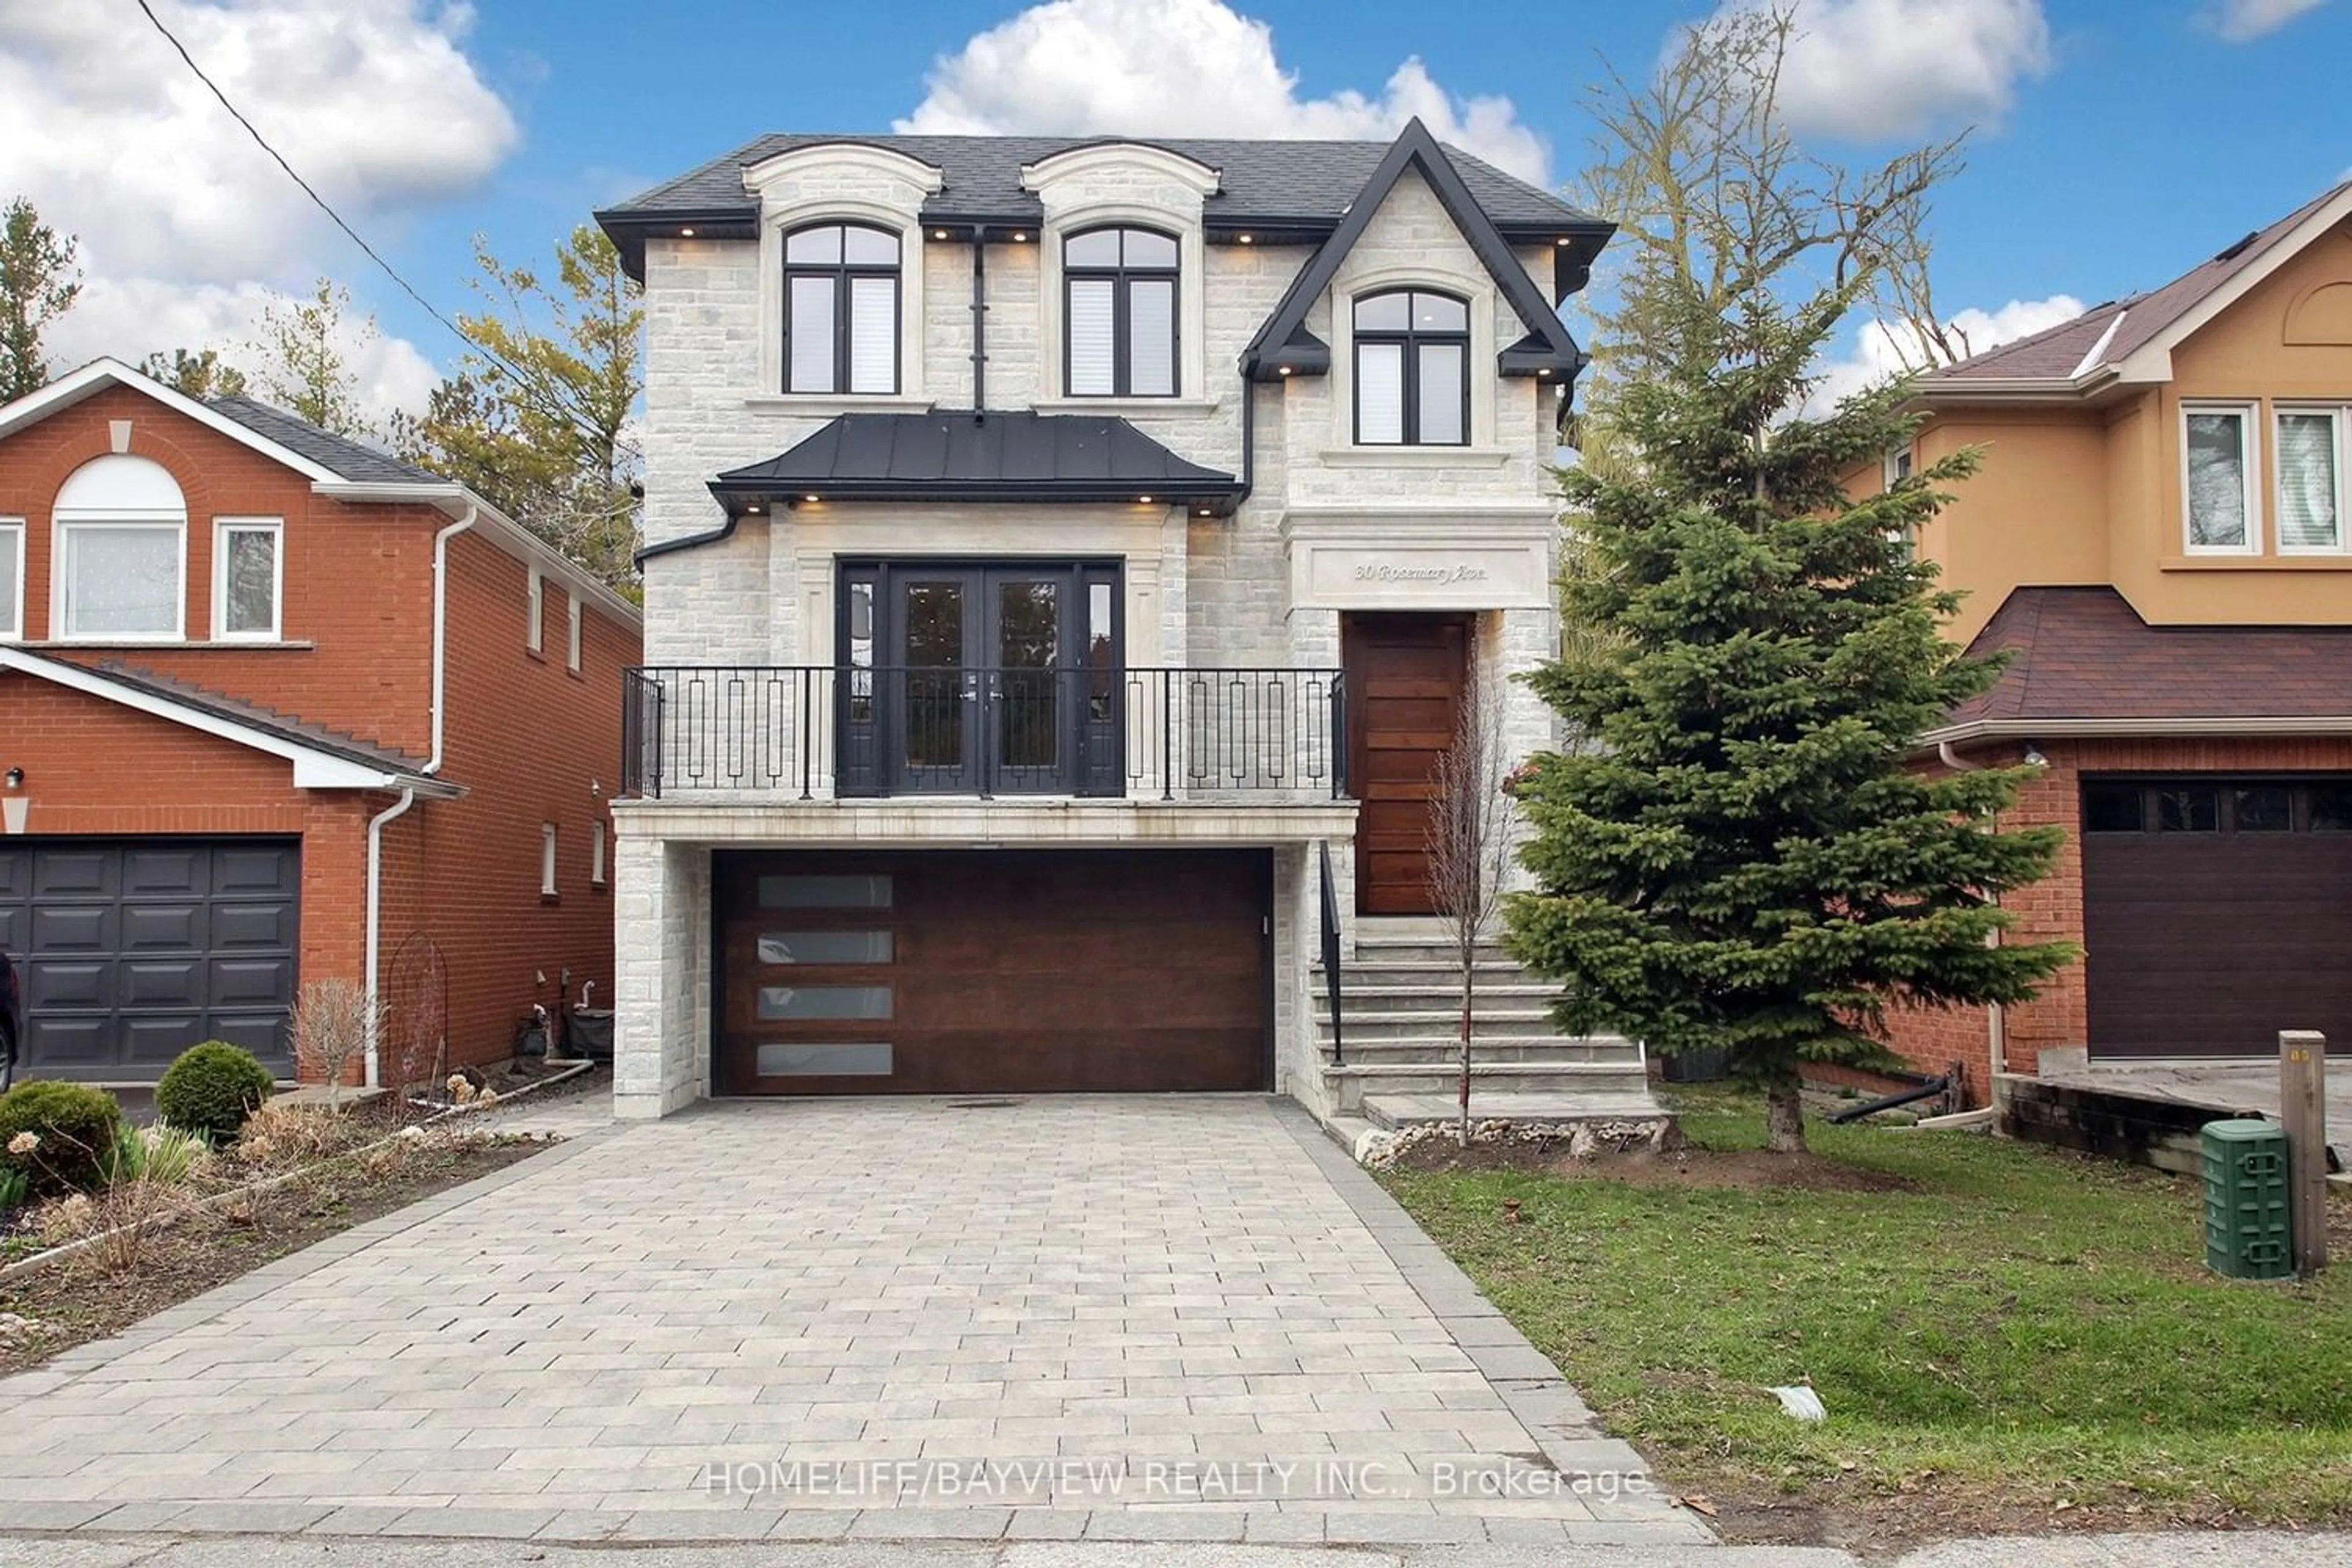 Home with brick exterior material for 30 Rosemary Ave, Richmond Hill Ontario L4E 3A9